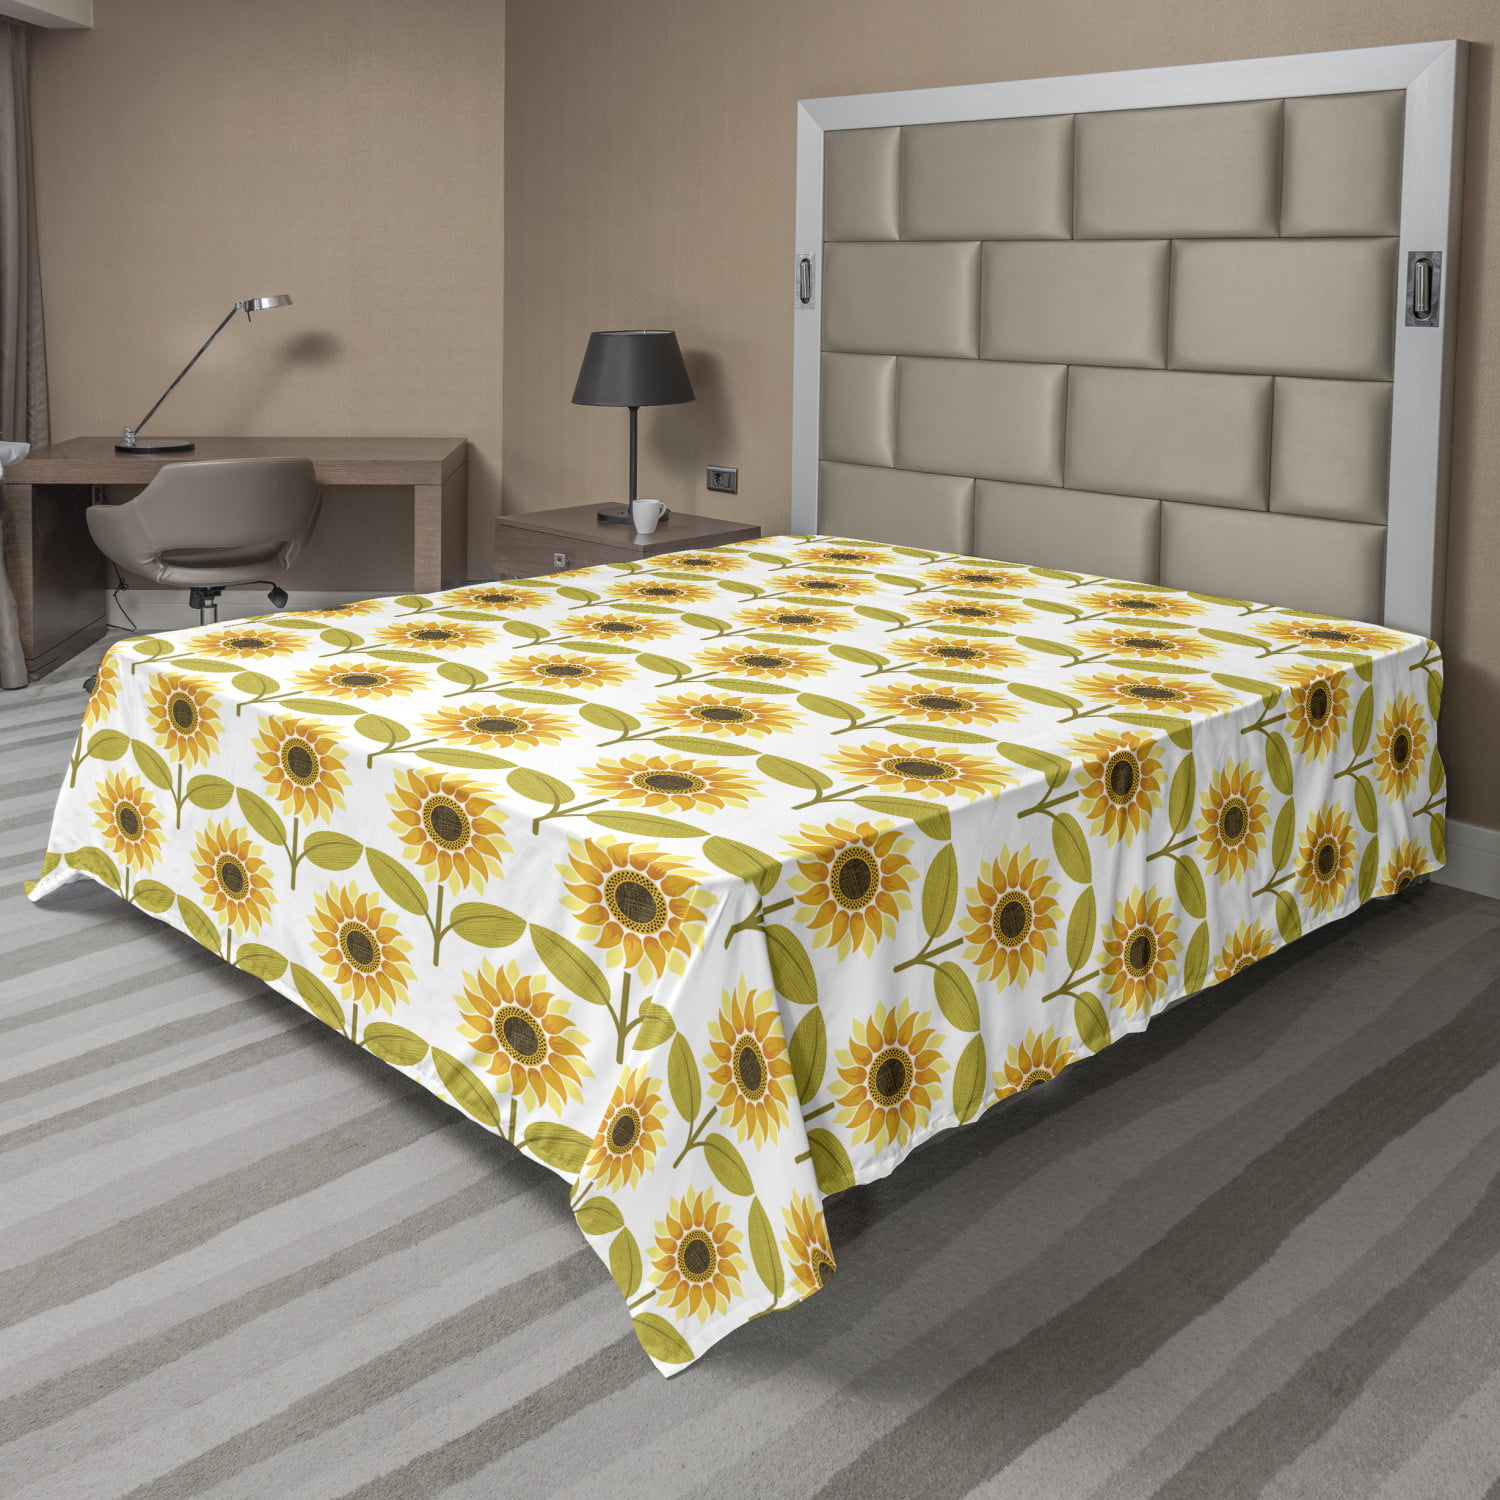 Decorative Printed 2 Piece Bedding Decor Set Yellow Green Twin Sunflowers Watercolor Painting Effect and in Minimalistic Design Artwork Ambesonne Sunflower Fitted Sheet & Pillow Sham Set